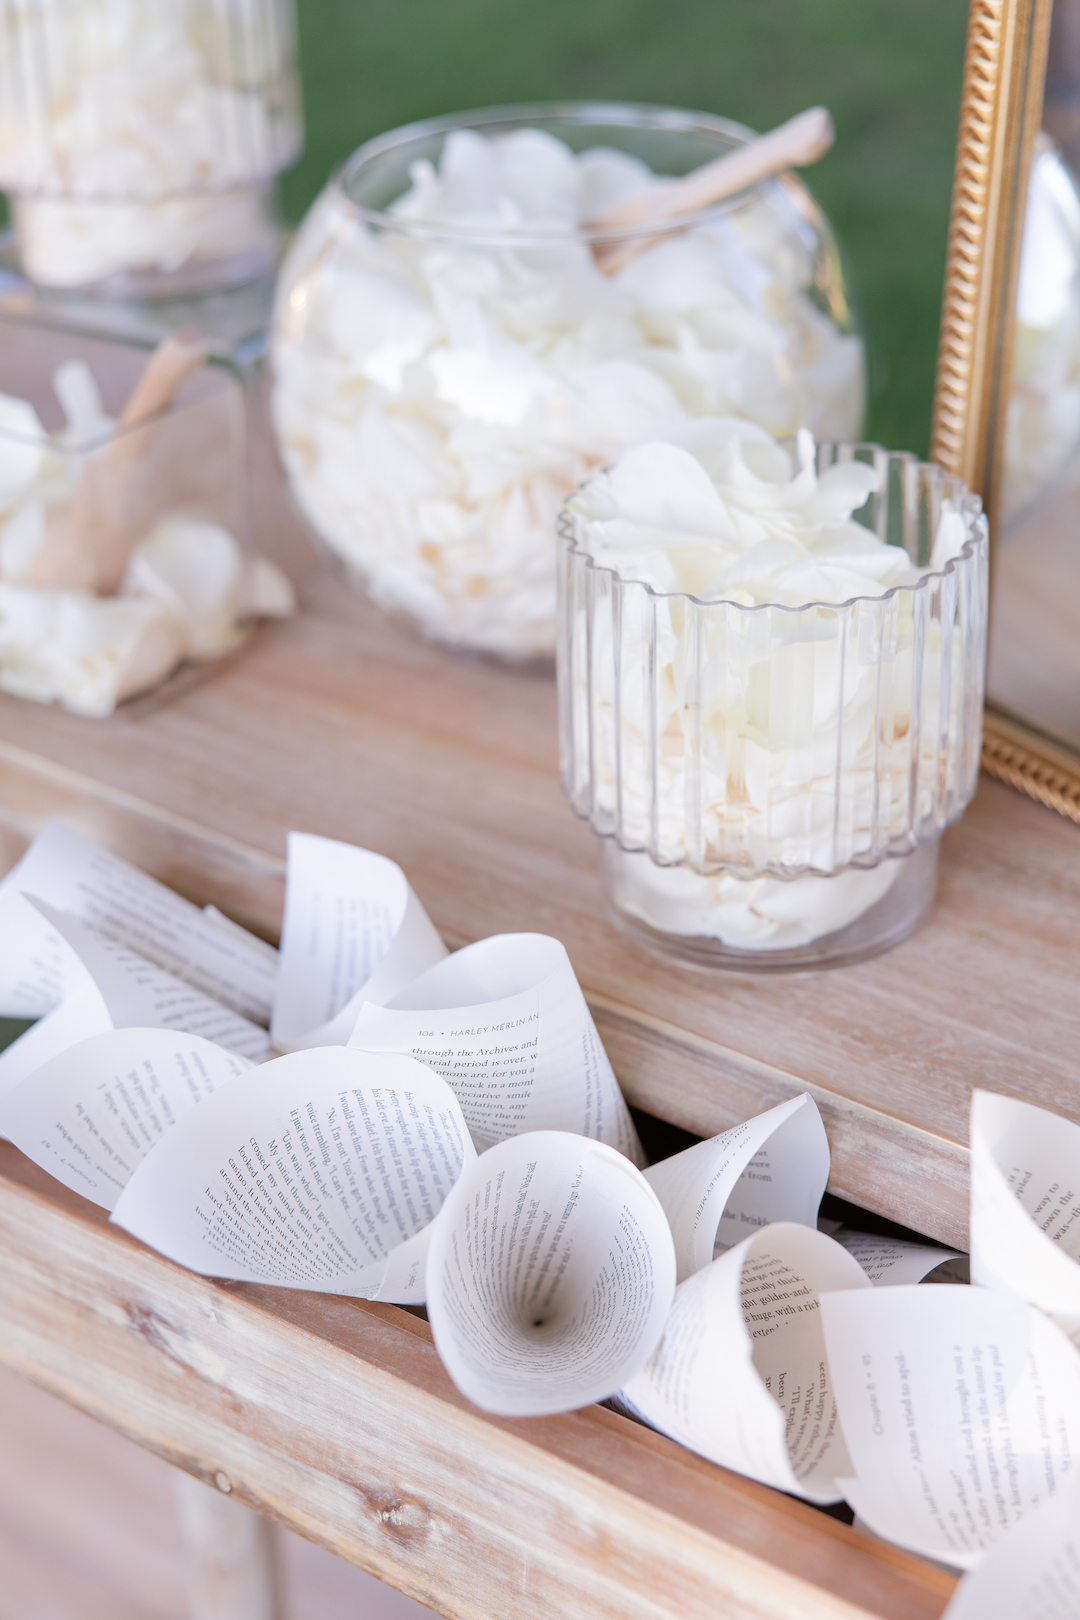 Wedding ceremony petal bar with paper cones and glass jars filled with white flower petals.